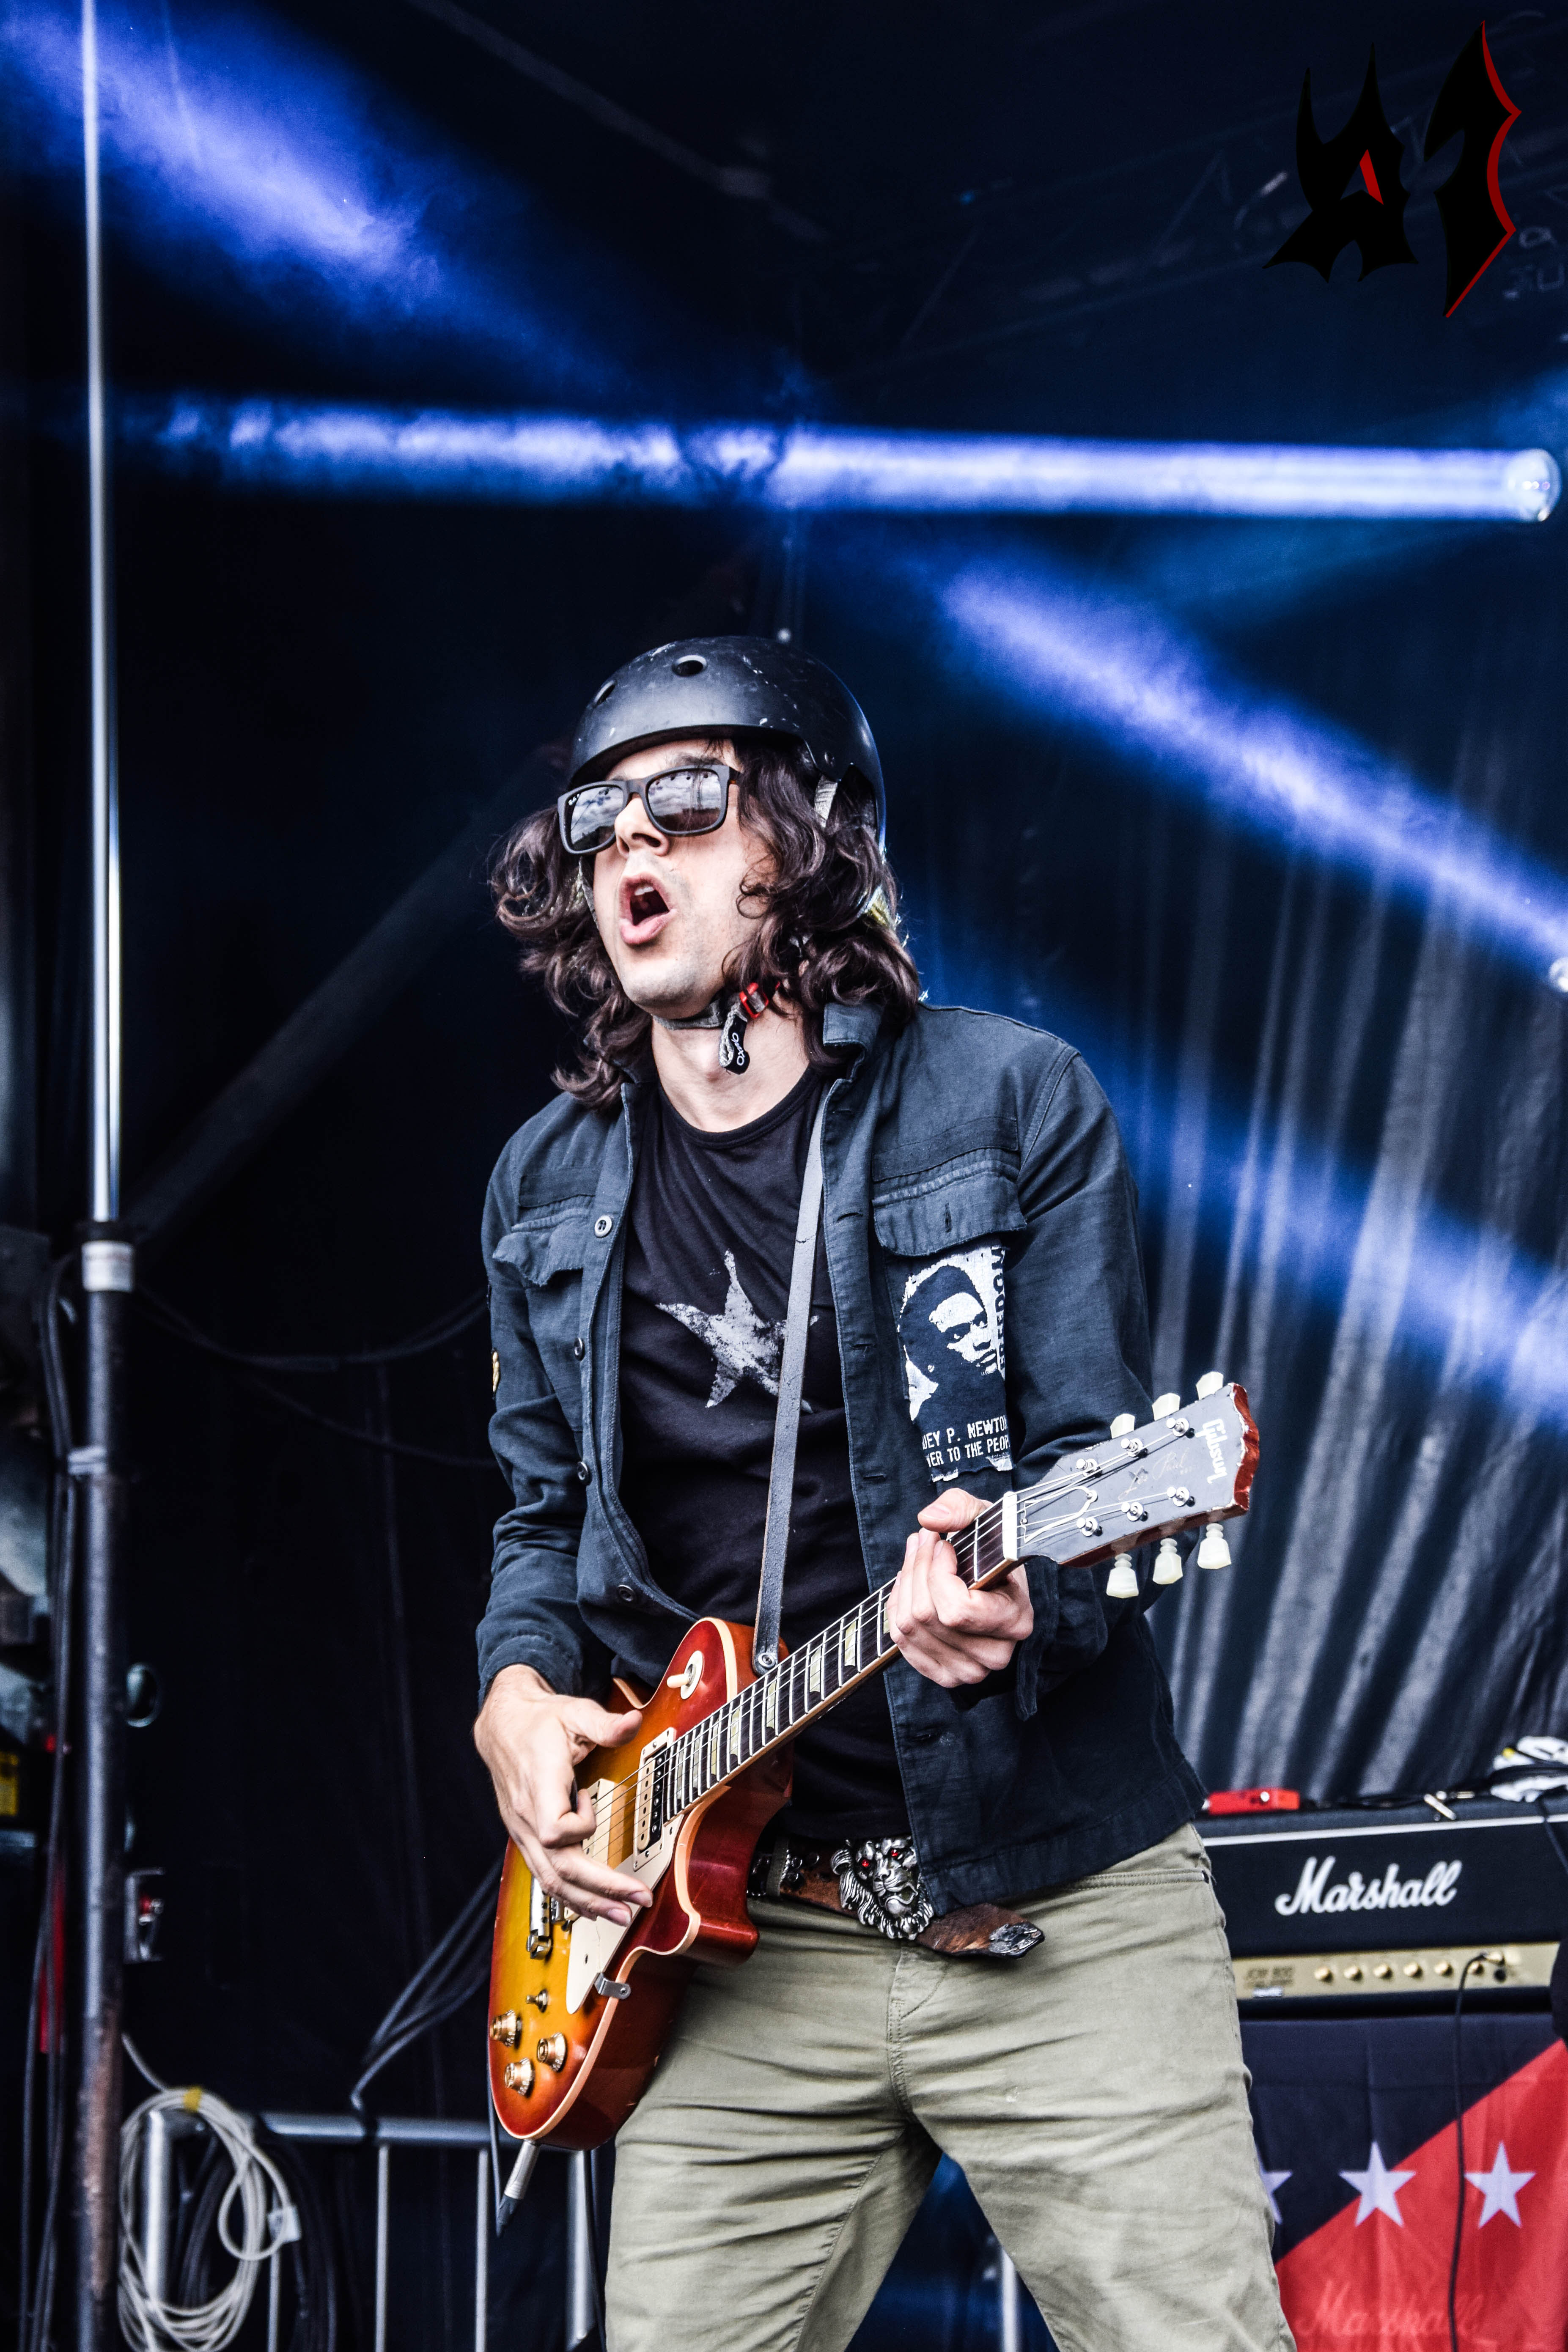 Donwload 2018 – Day 3 - The Last Internationale 1